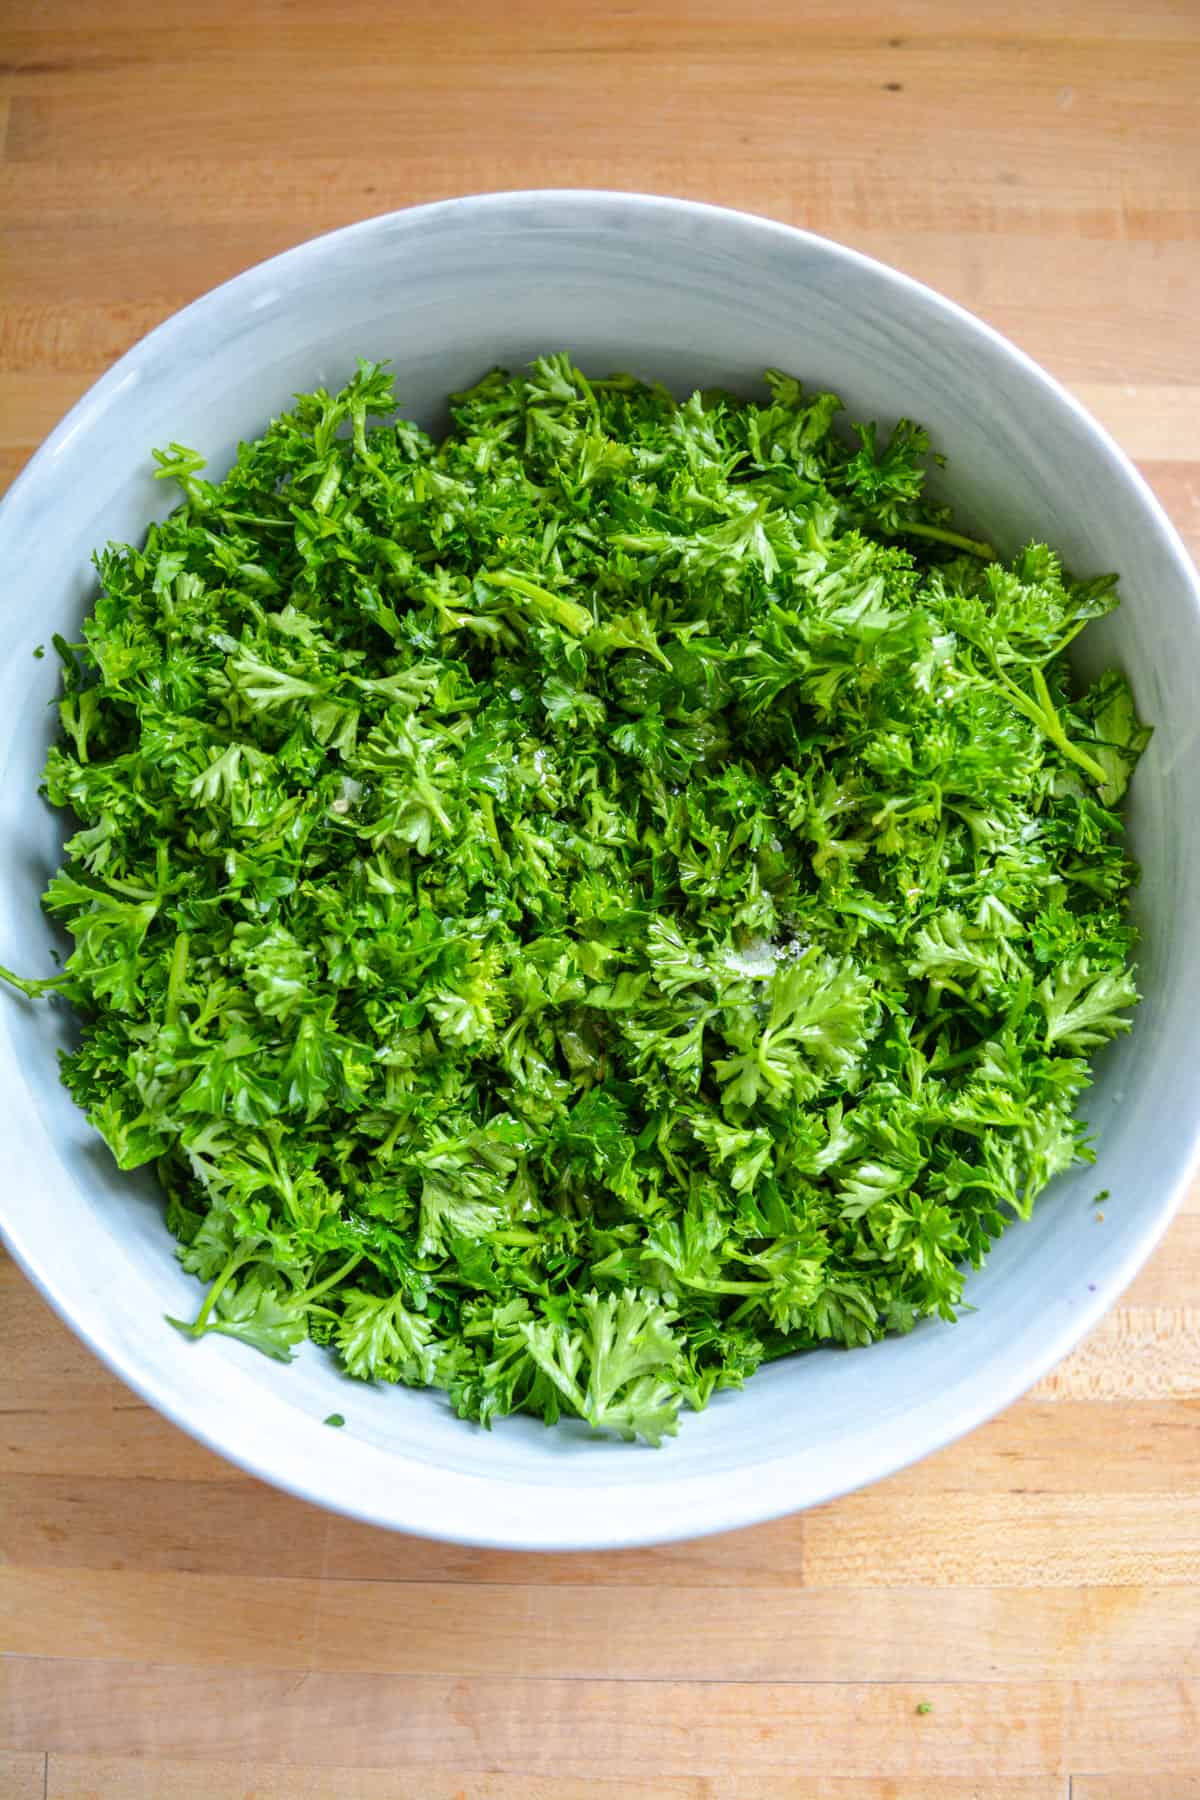 Parsley, lemon juice, olive oil and salt added into the mixing bowl.